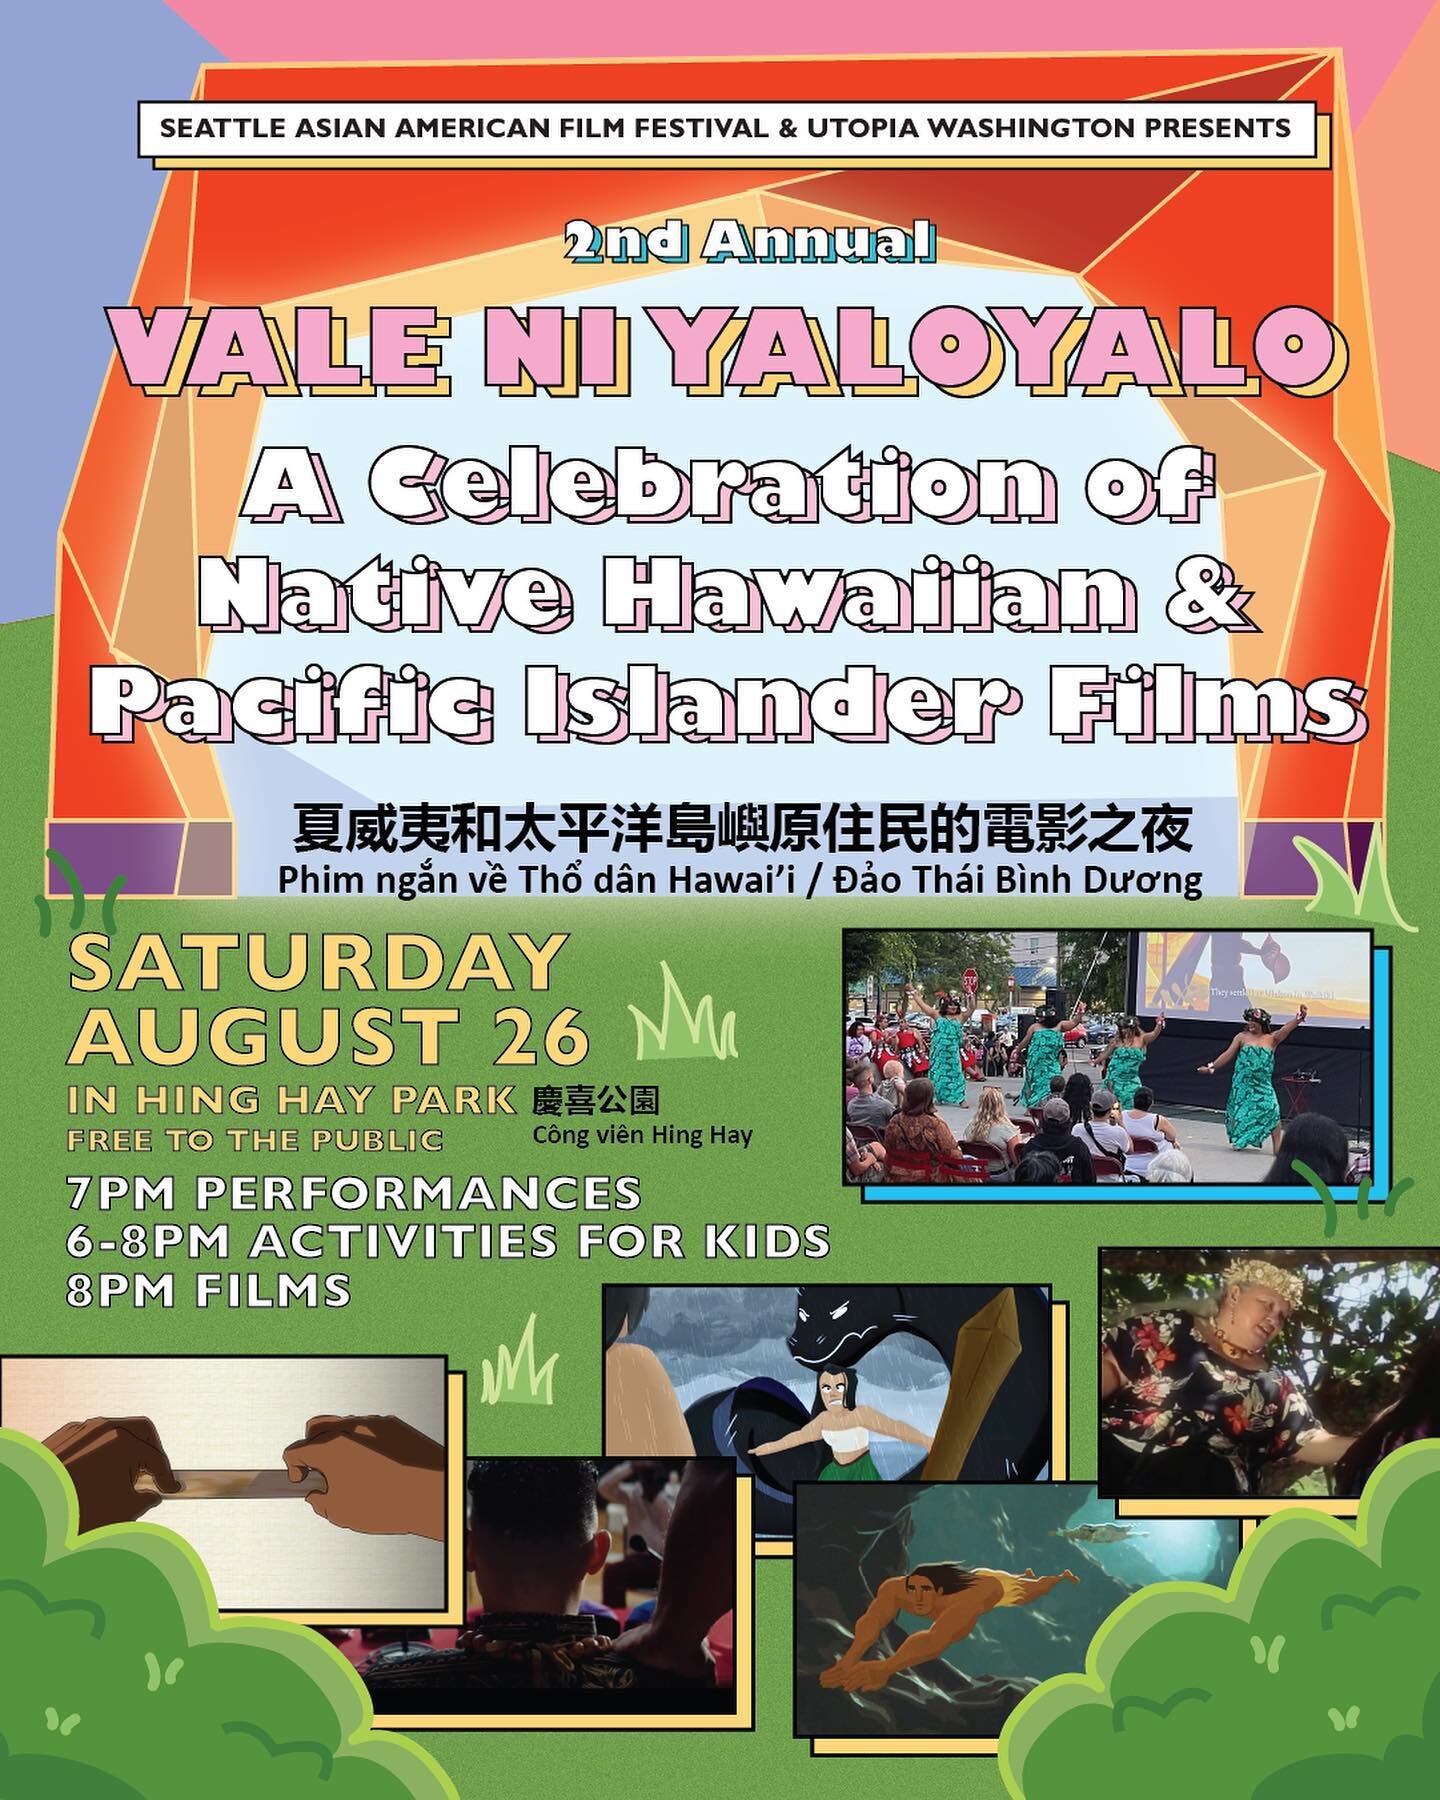 Seattle Asian American Film Fest this Saturday 8/26 🎬
@seattleaaff @cidblockparty 

SAAFF // Hing Hay Park Seattle // 7pm performances // 8pm Films // FREE // All Ages

I'll be playing a short music set w/ da familia @zqli on Bass &amp; Chris Mena o